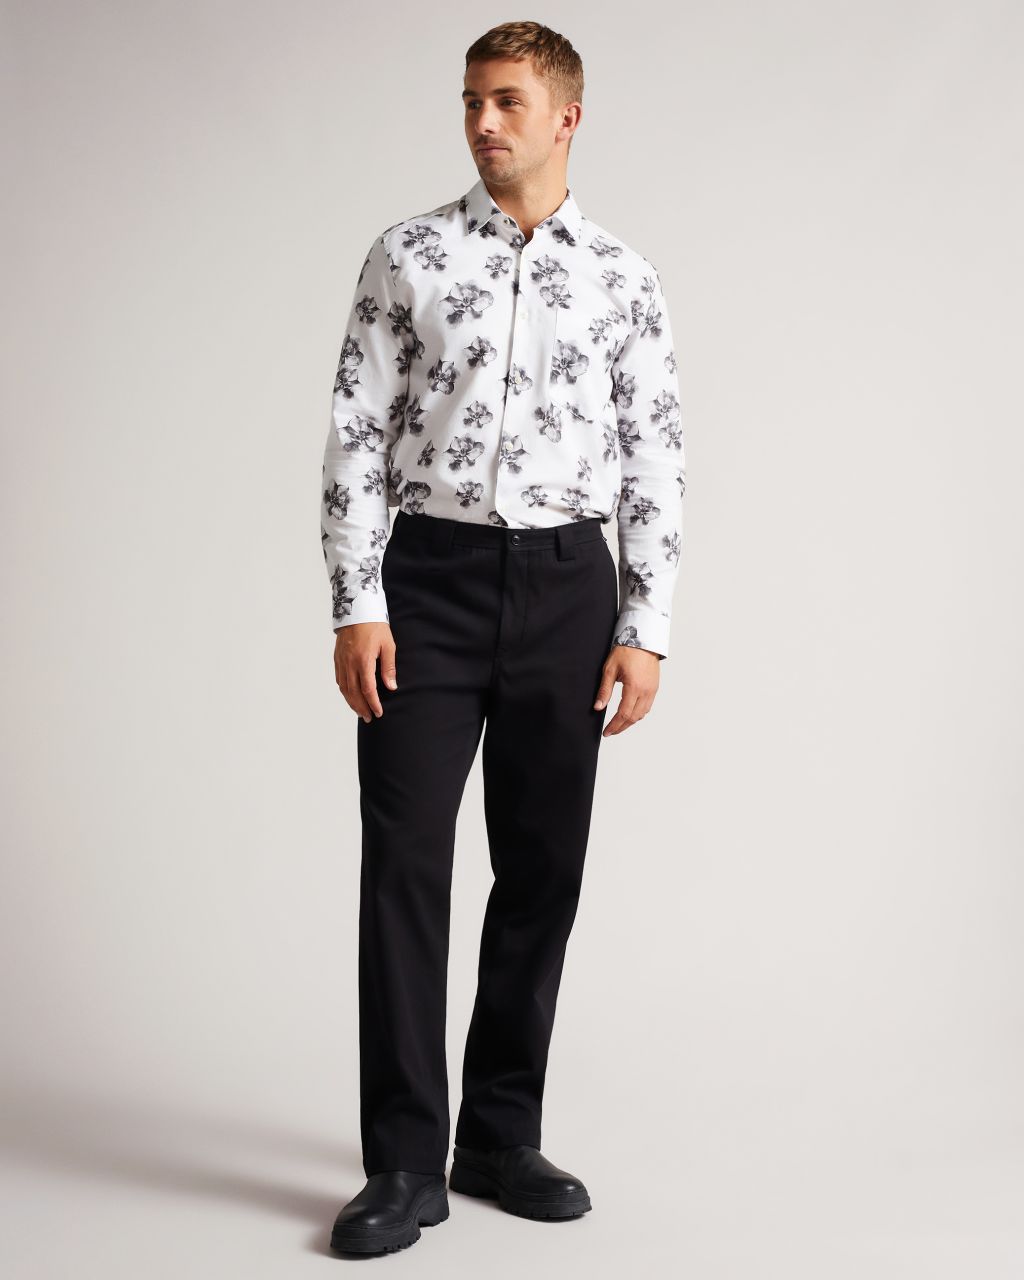 Ted Baker Men's Ls Photographic Magnolia Print Shirt in White, Milhill, Cotton